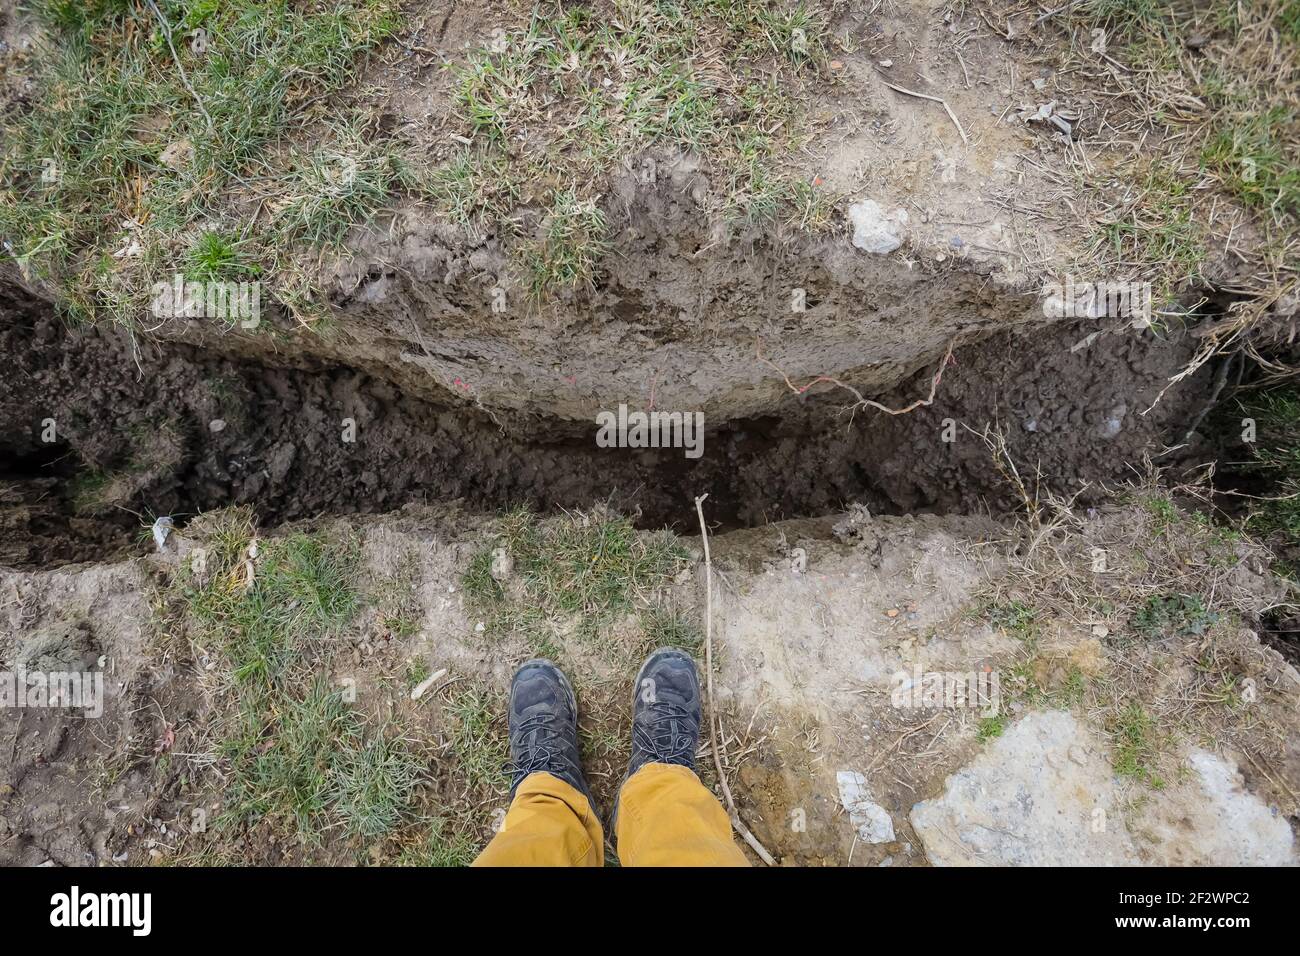 Large crater in the ground after a strong earthquake of magnitude 6.2., which was 2 months ago. Comparison of human legs with crater size. Stock Photo